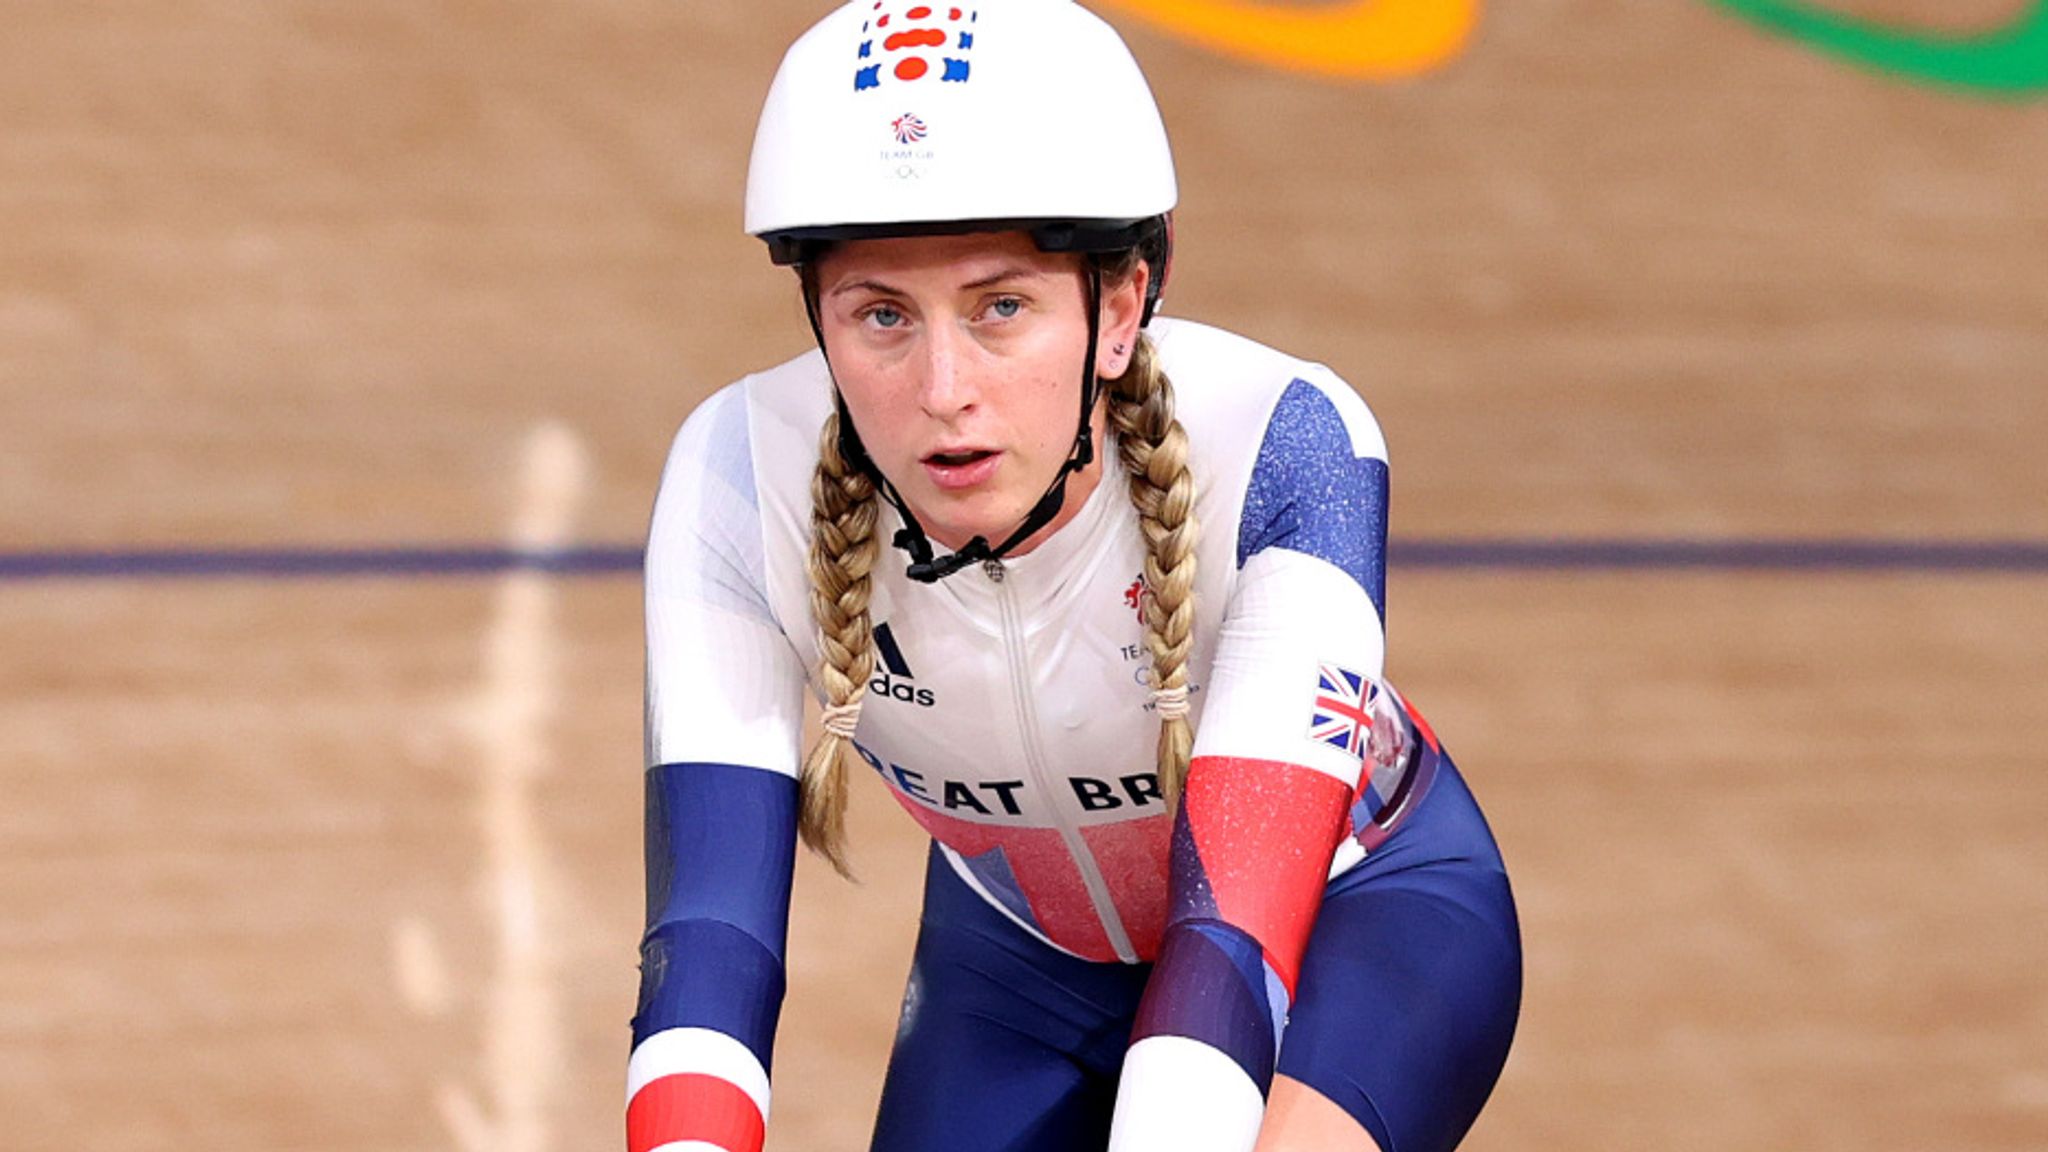 Commonwealth Games Dame Laura Kenny considered quitting cycling after ectopic pregnancy Athletics News Sky Sports